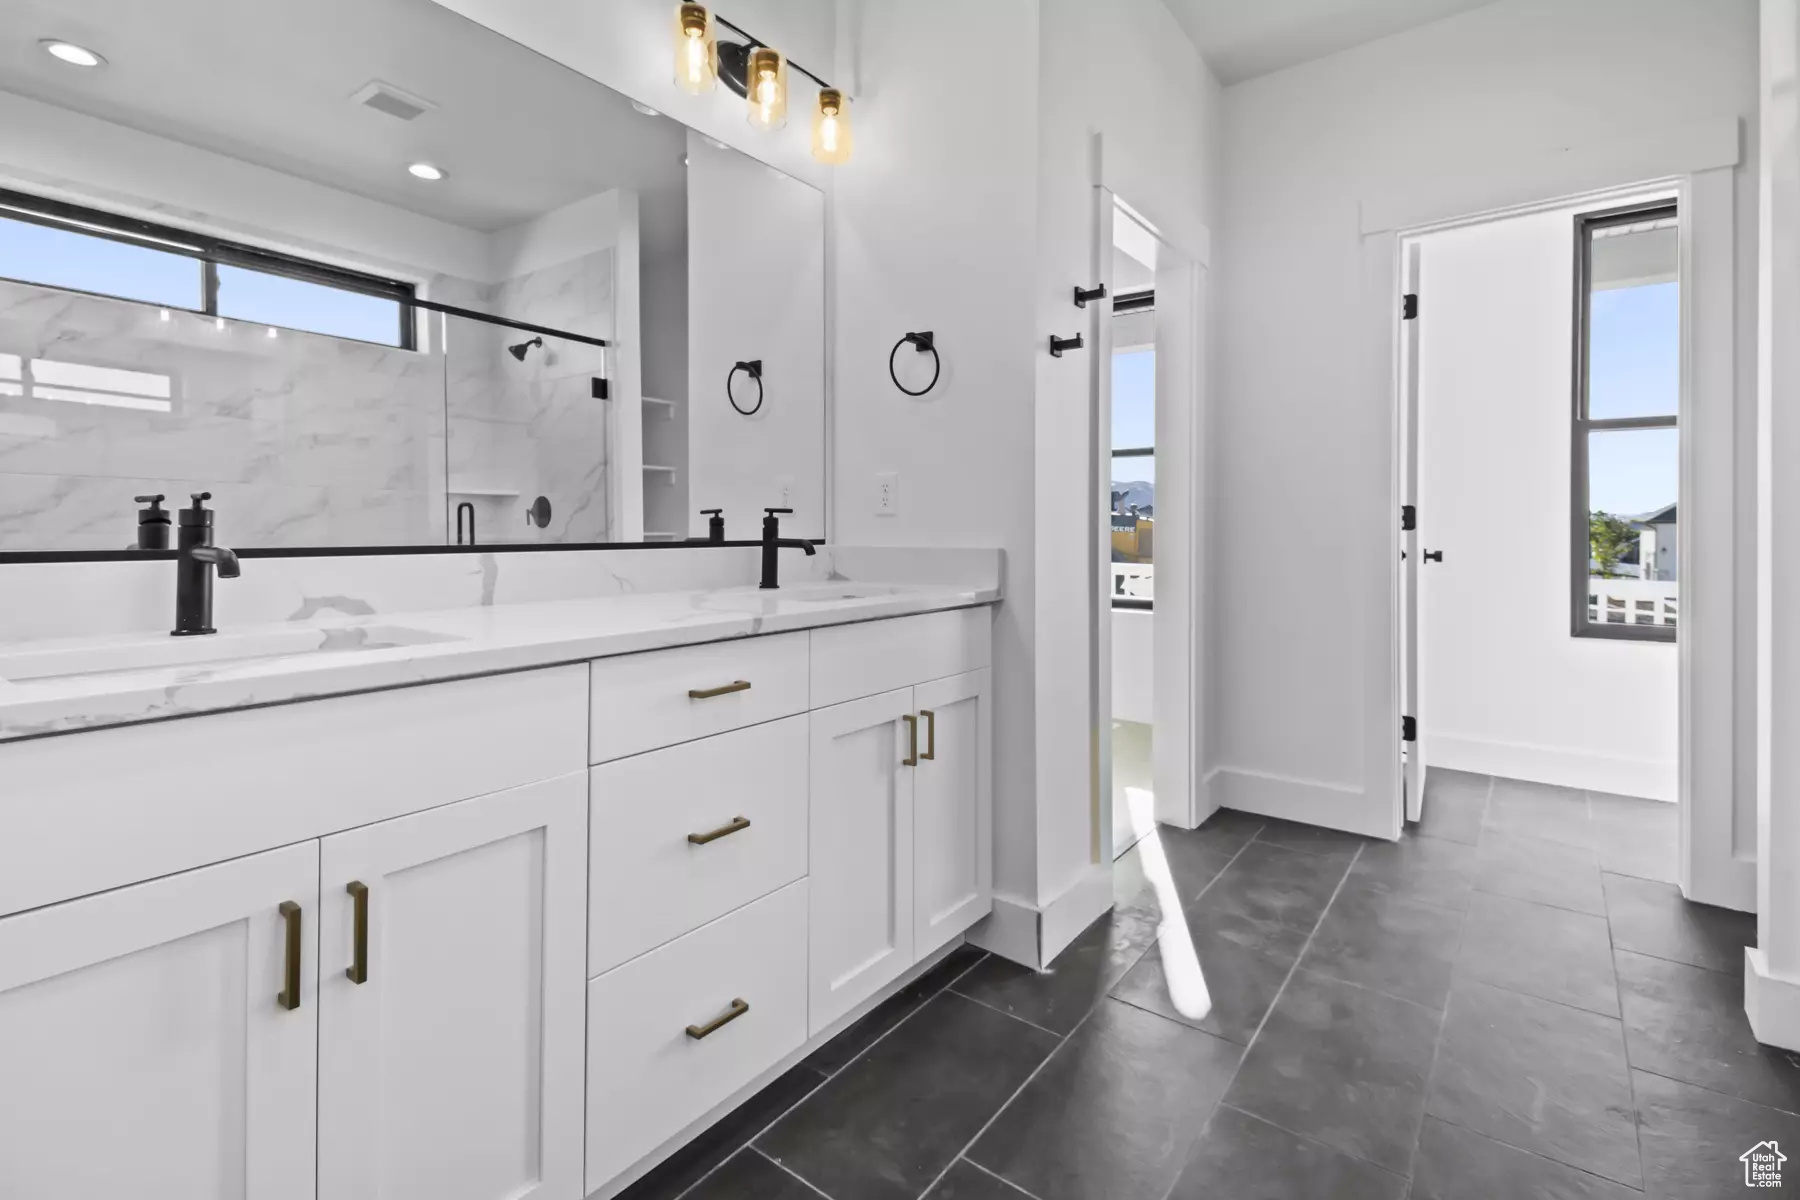 Bathroom with plenty of natural light, a shower with shower door, double vanity, and tile flooring